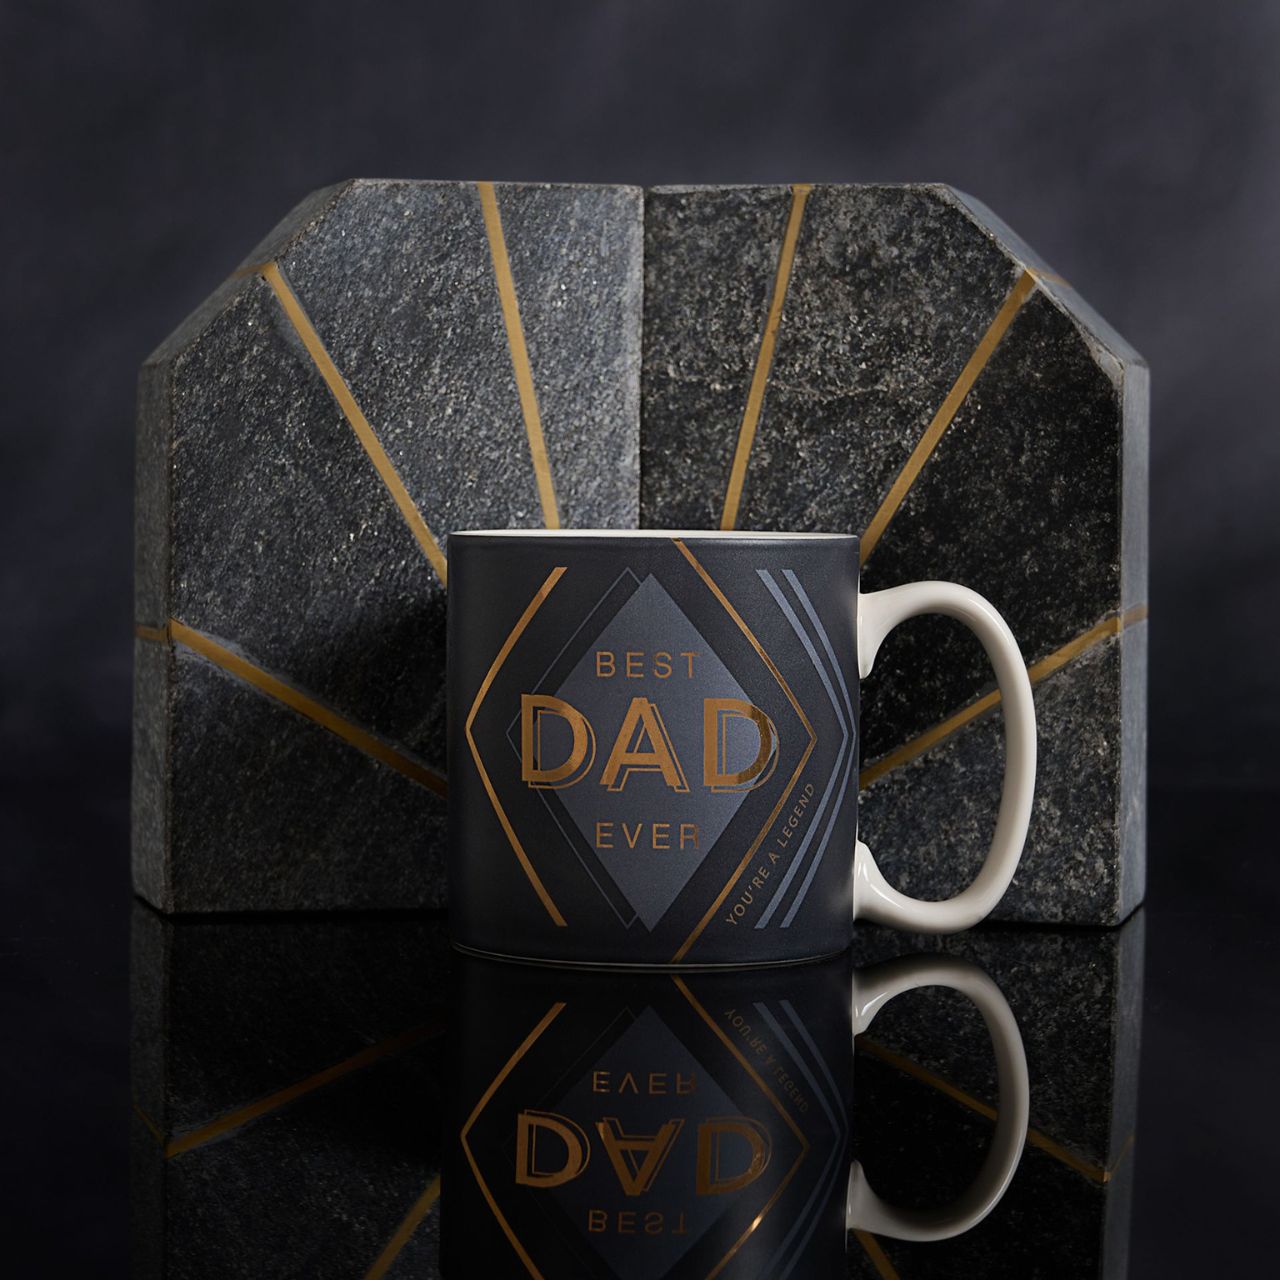 This standout mug makes a fantastic gift for legendary fathers.